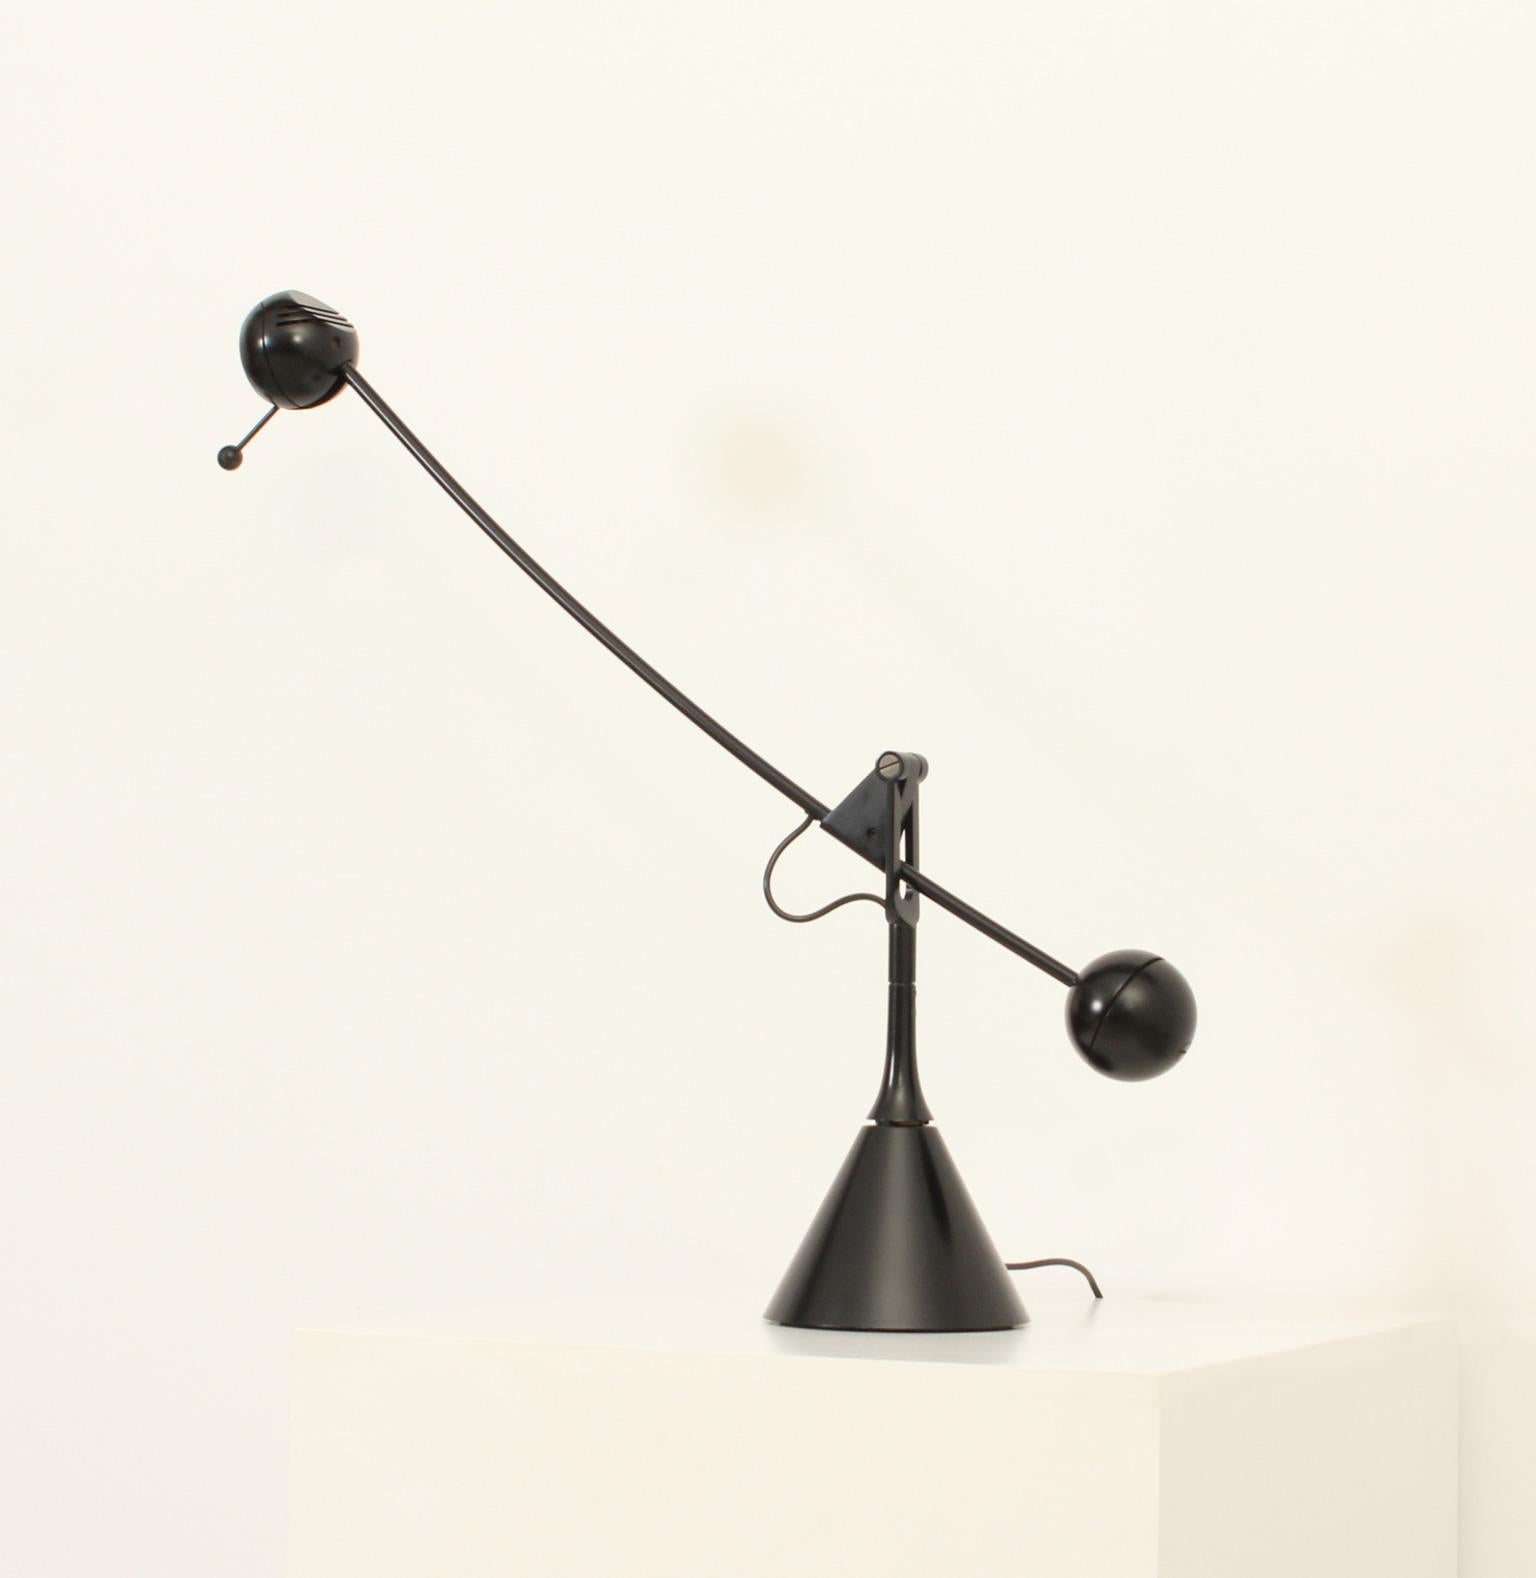 Calder table lamp designed in 1975 by Enric Franch for Metalarte, Spain. Sculptural table lamp with a counterweight that can move in any direction. Black lacquered metal with light intensity regulator.